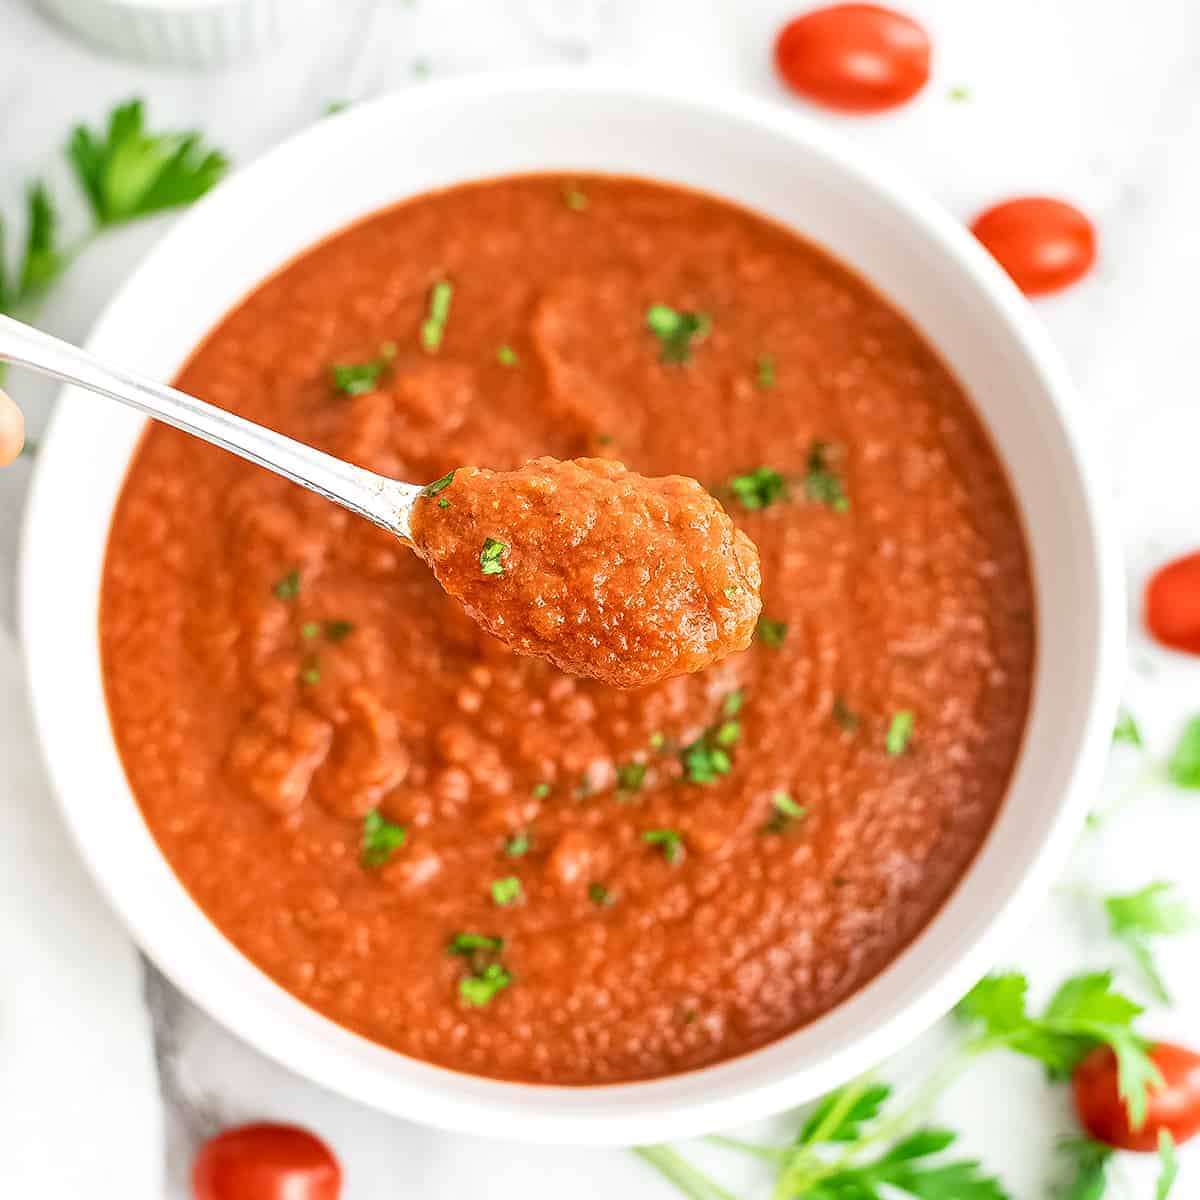 Easy Whole30 Spaghetti Sauce (Ready in 5 Minutes) | Bites of Wellness